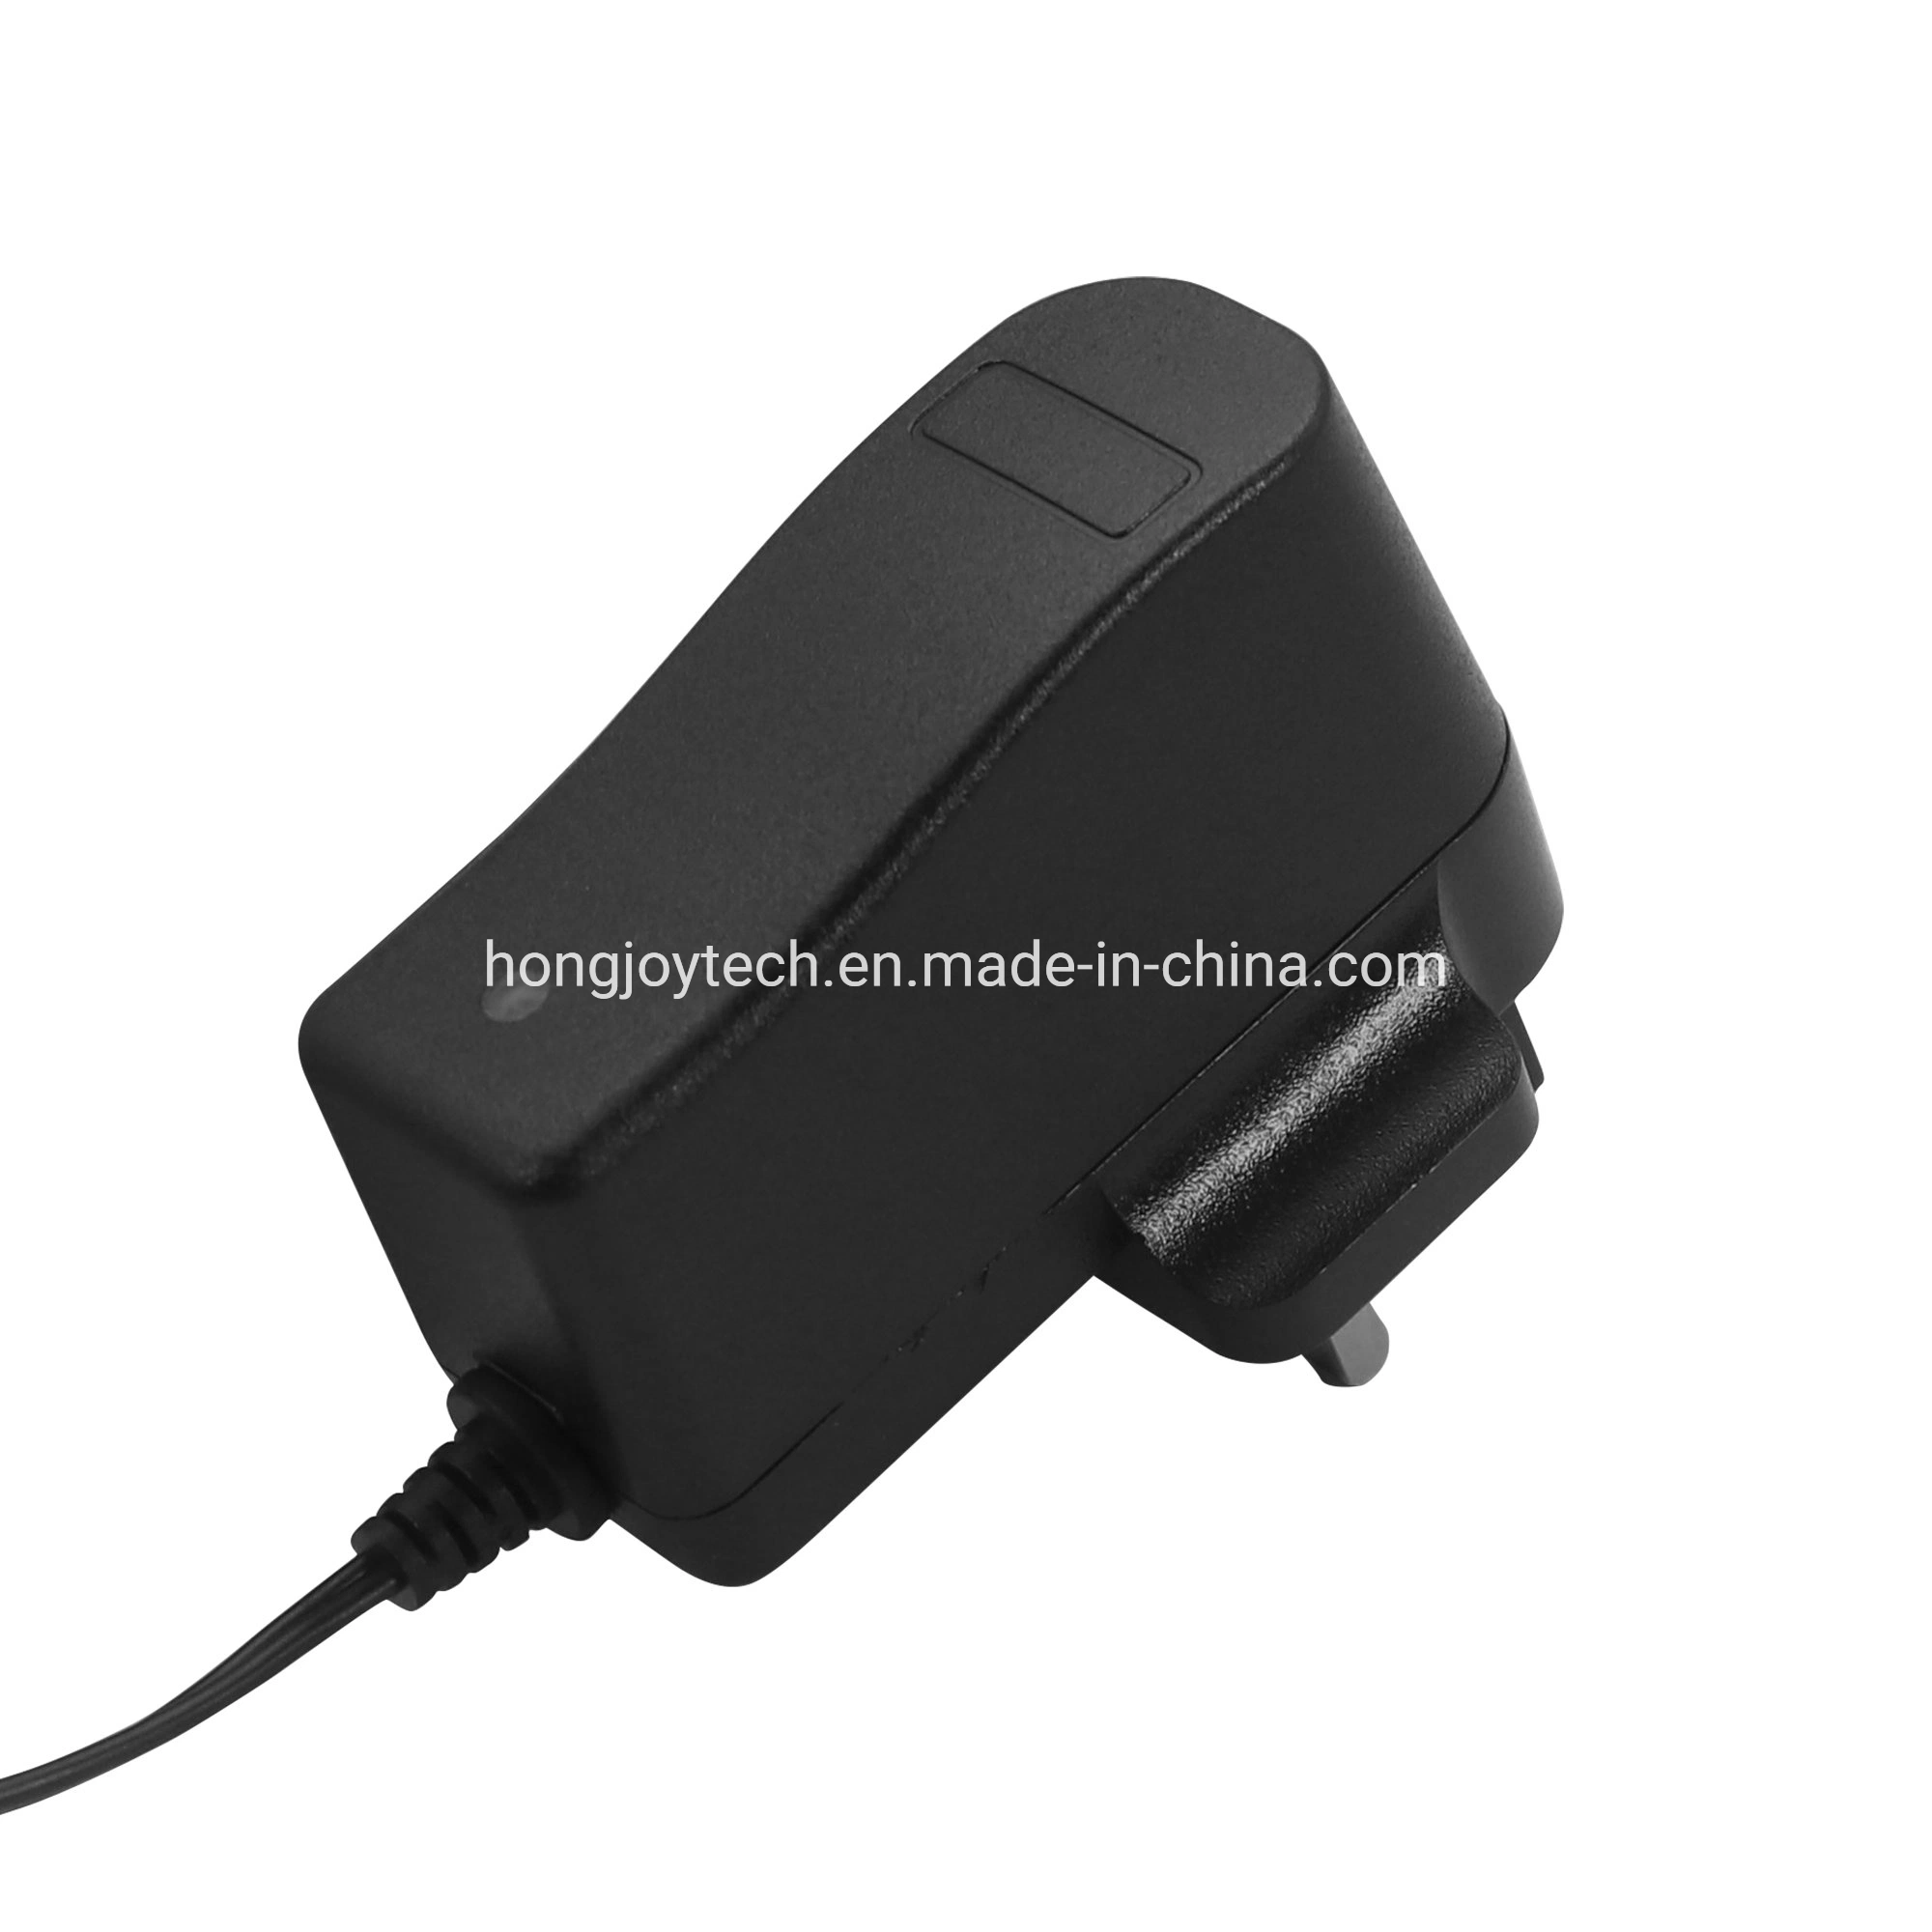 CE 100-240VAC 47-63Hz Input 12.6V 16.8V 7.4V 8.4V 0.5A 1A 1.5A 2A Output AC DC Power Supply Adapter 1A Lead Acid Battery 12V 2.6ah Rechargeable Battery Charger